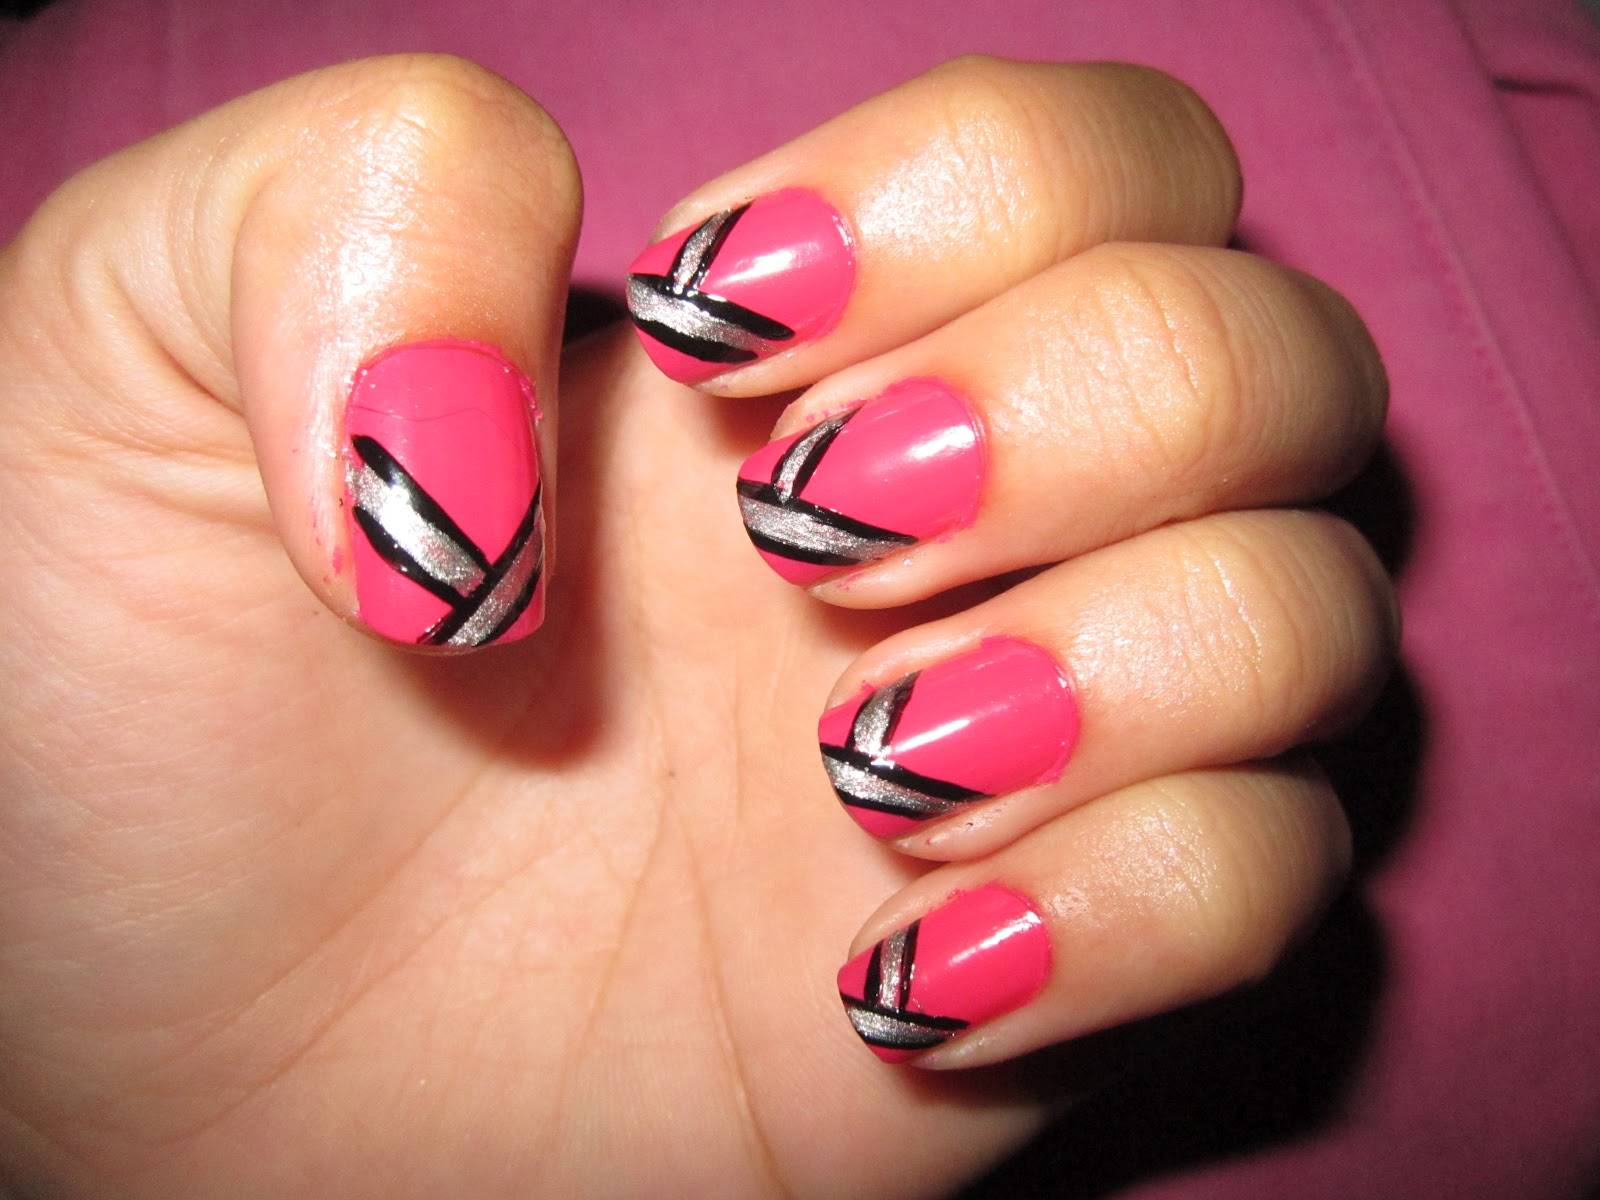 10. Cute Nail Art Pictures - wide 10